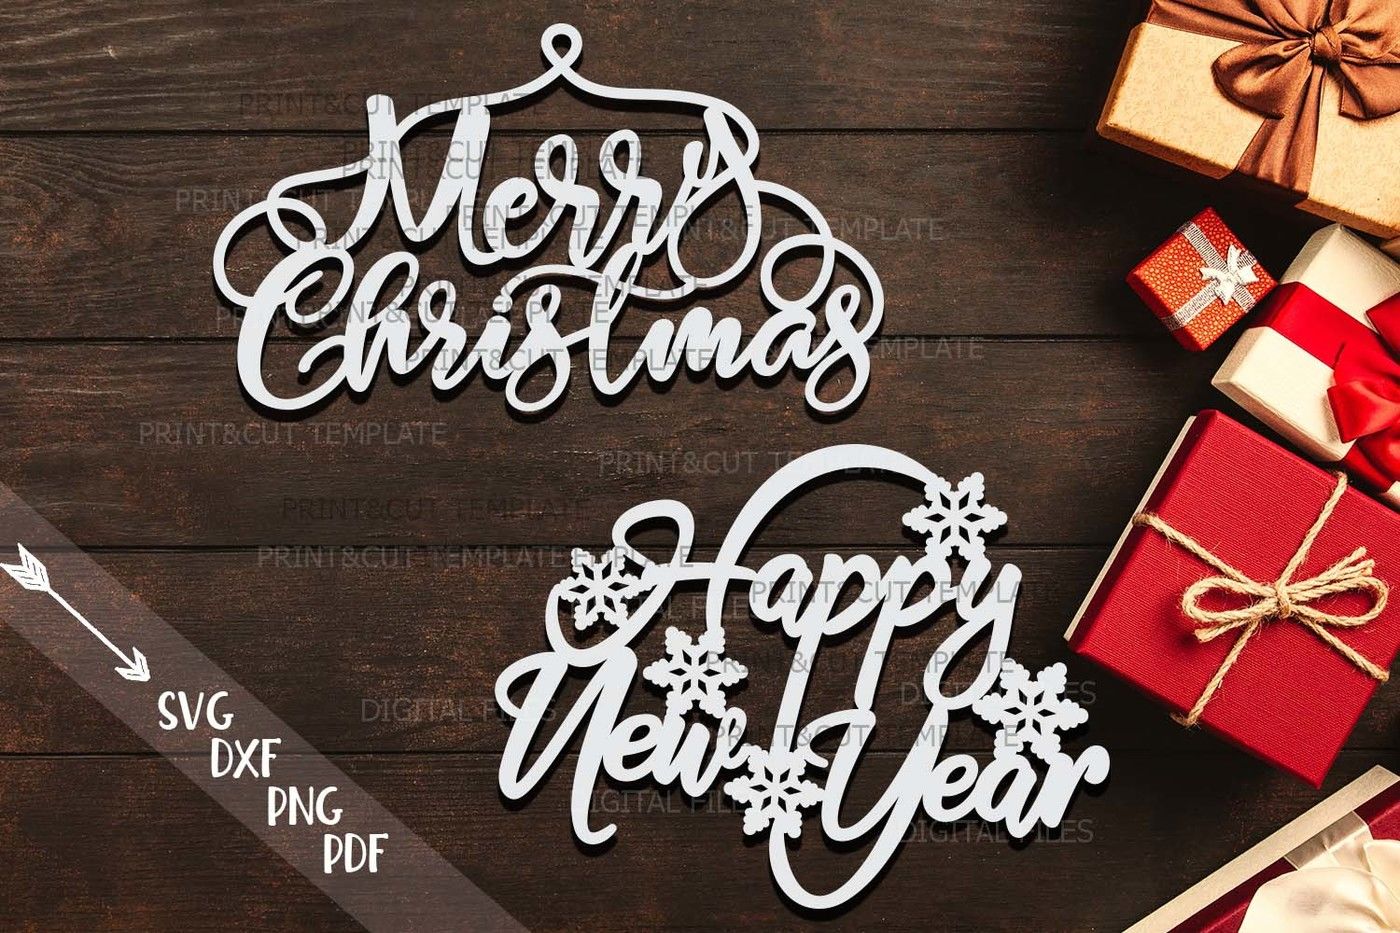 Christmas Hanging Ornament Merry Christmas Happy New Year Svg Dxf Pdf By Kartcreation Thehungryjpeg Com